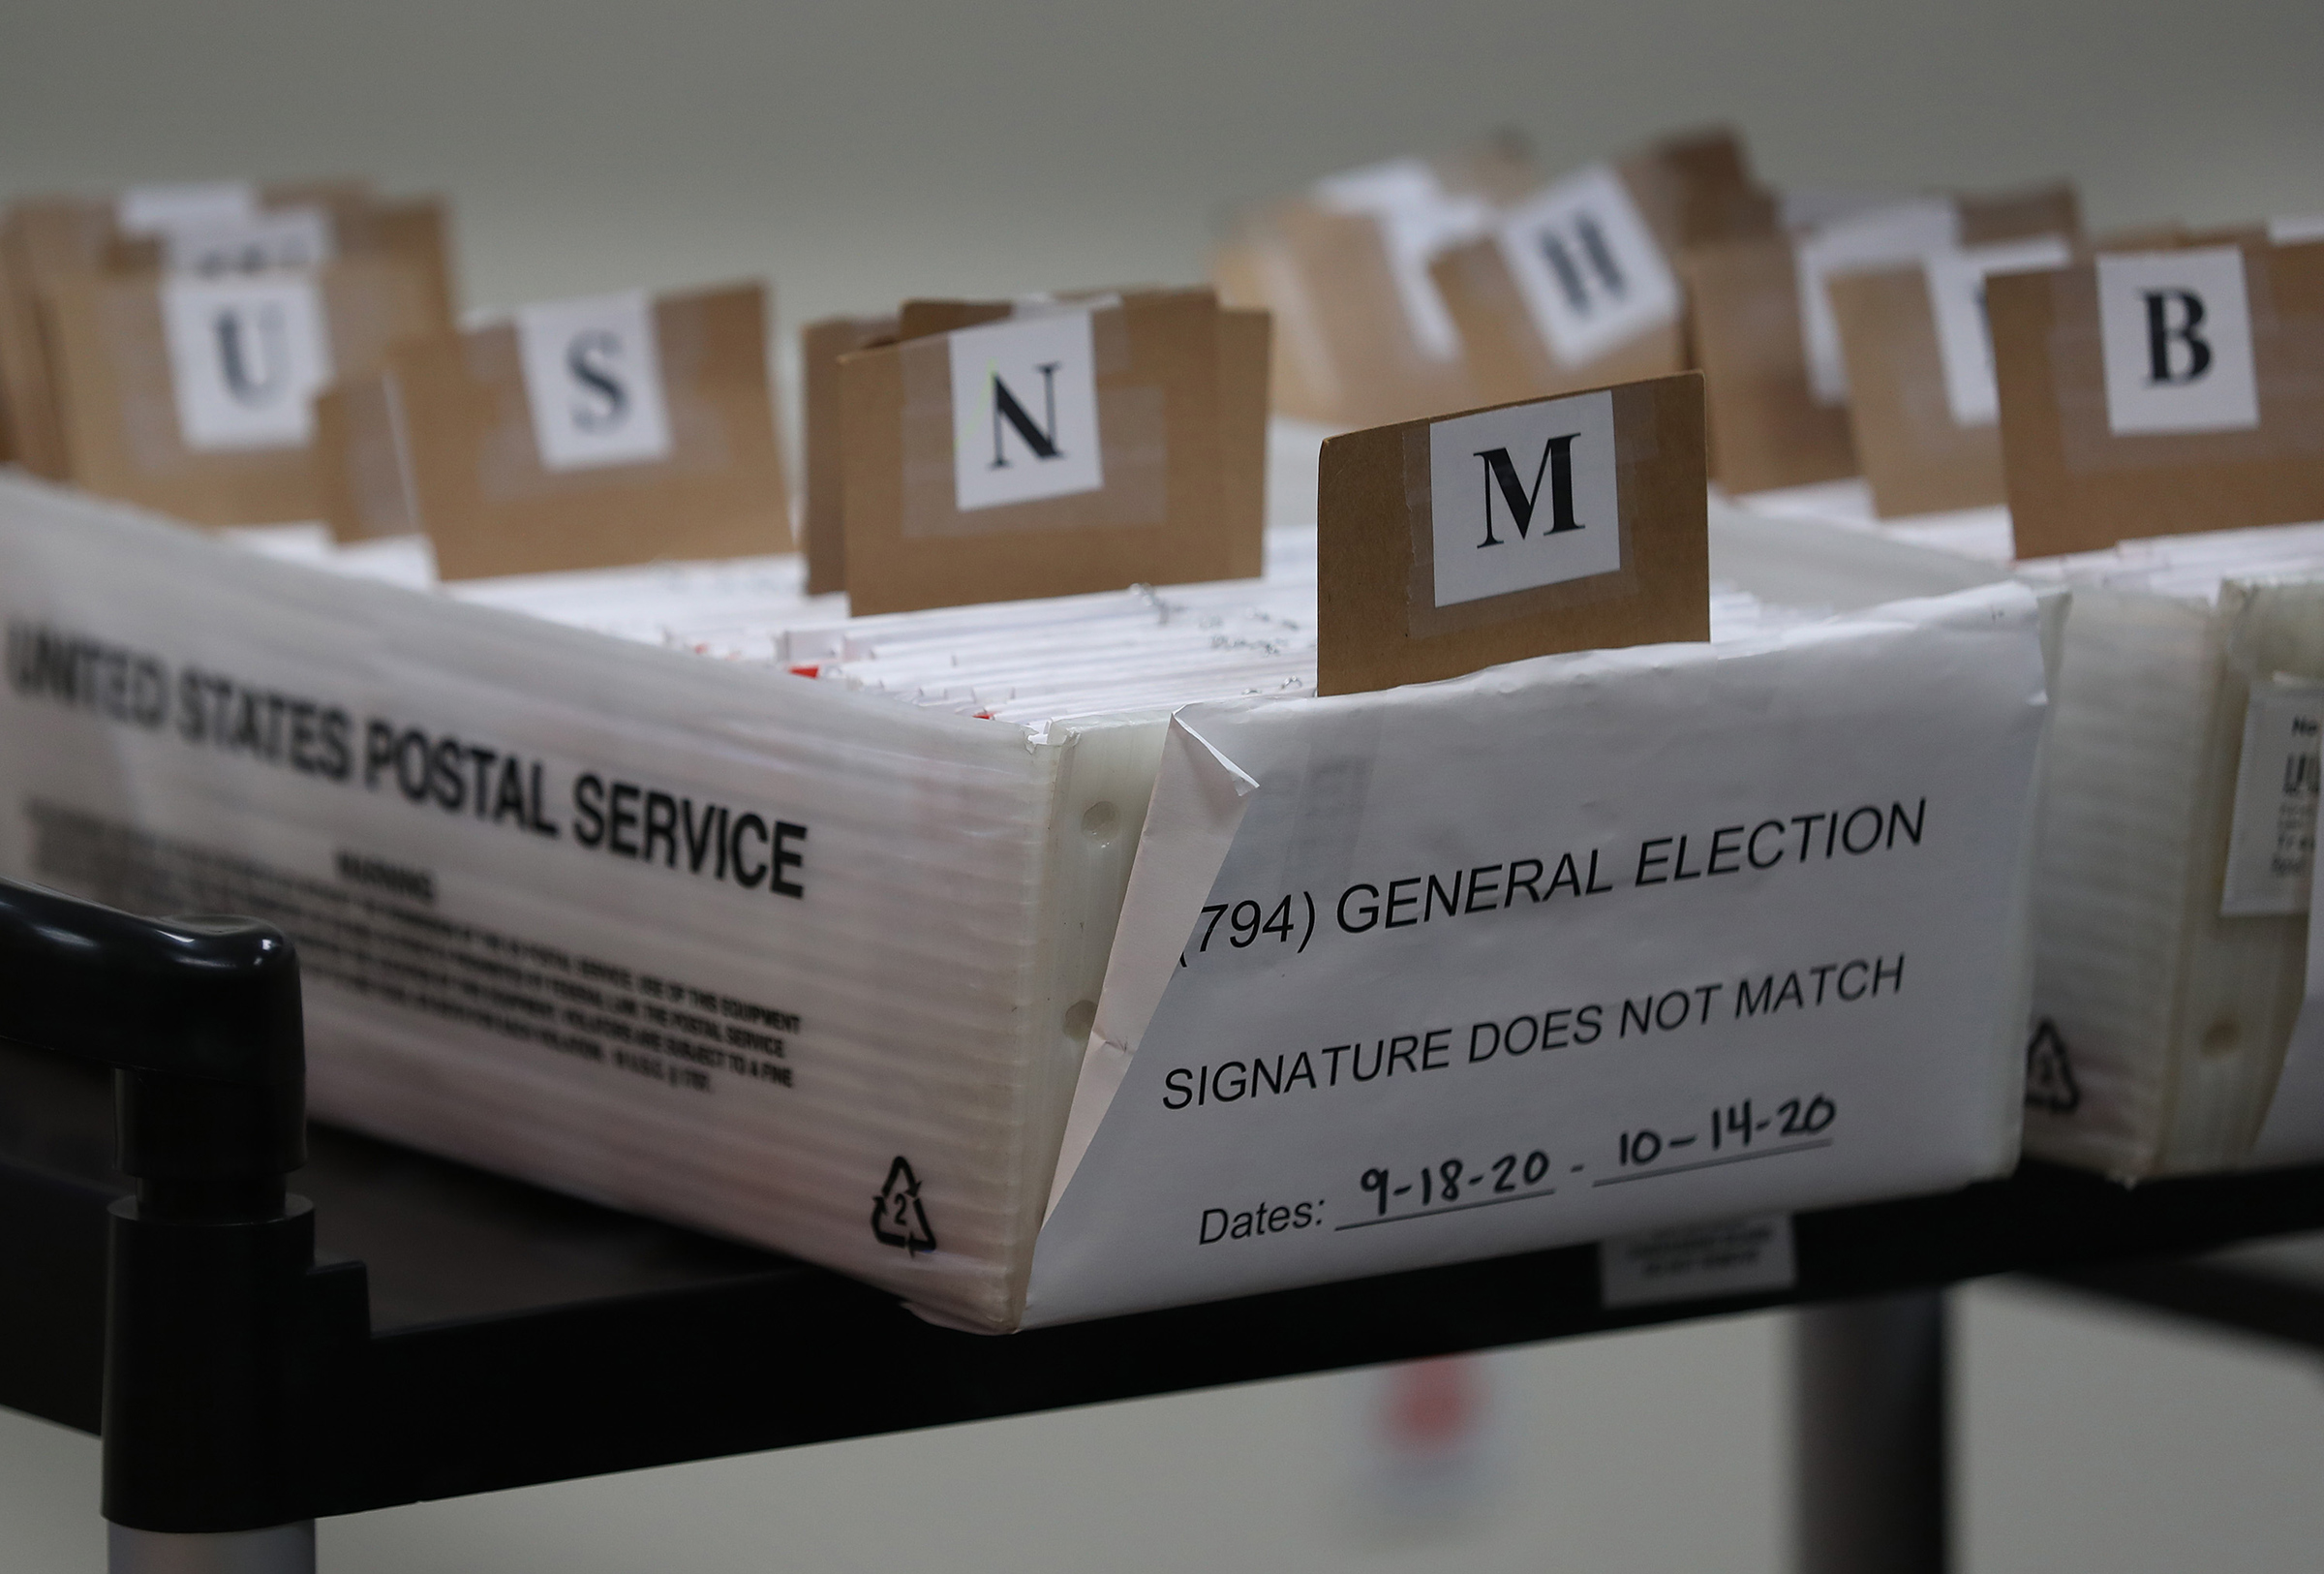 Boxes for Vote-by-Mail ballots that need to be reviewed due to signature discrepancies are seen ahead of the Nov. 3 general election at the Miami-Dade County Elections Department on Oct. 15 in Doral, Fla. (Joe Raedle—Getty Images)